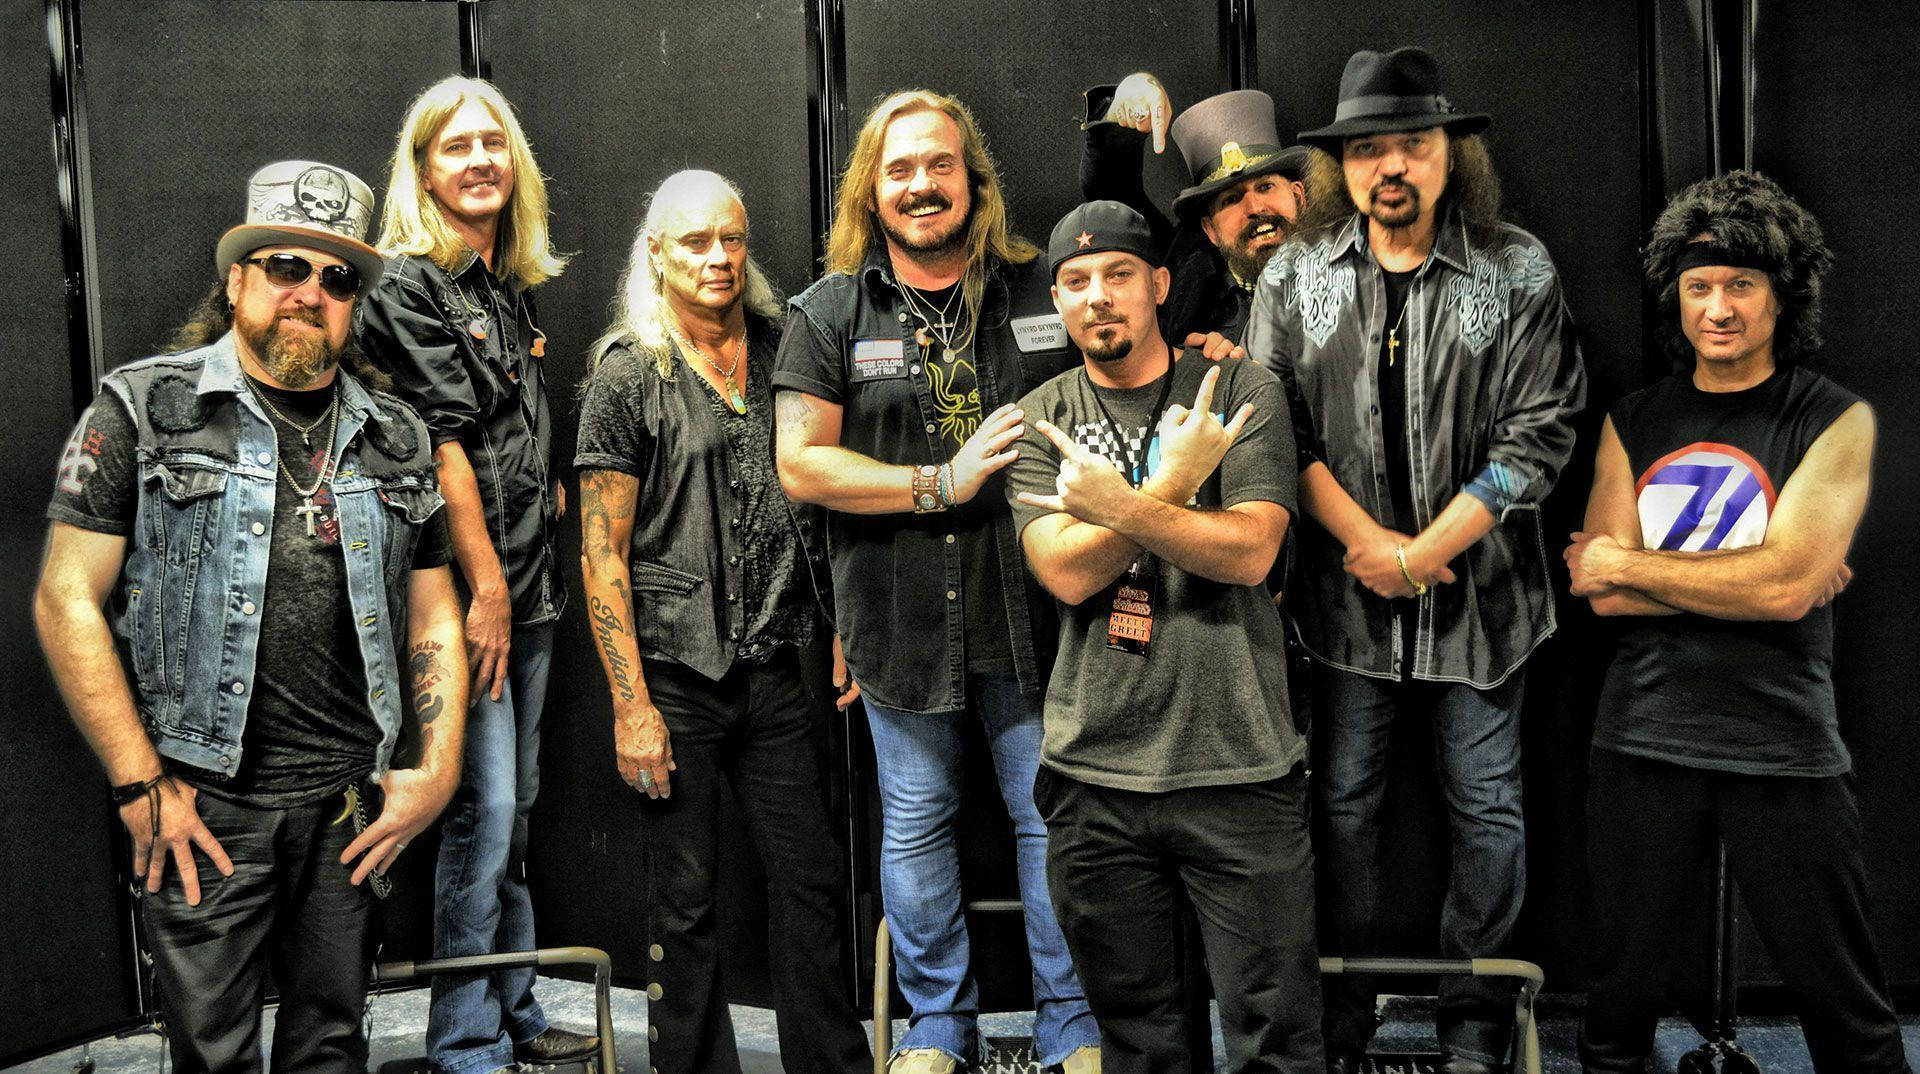 American Rock Band Lynyrd Skynyrd Backstage Photo Picture